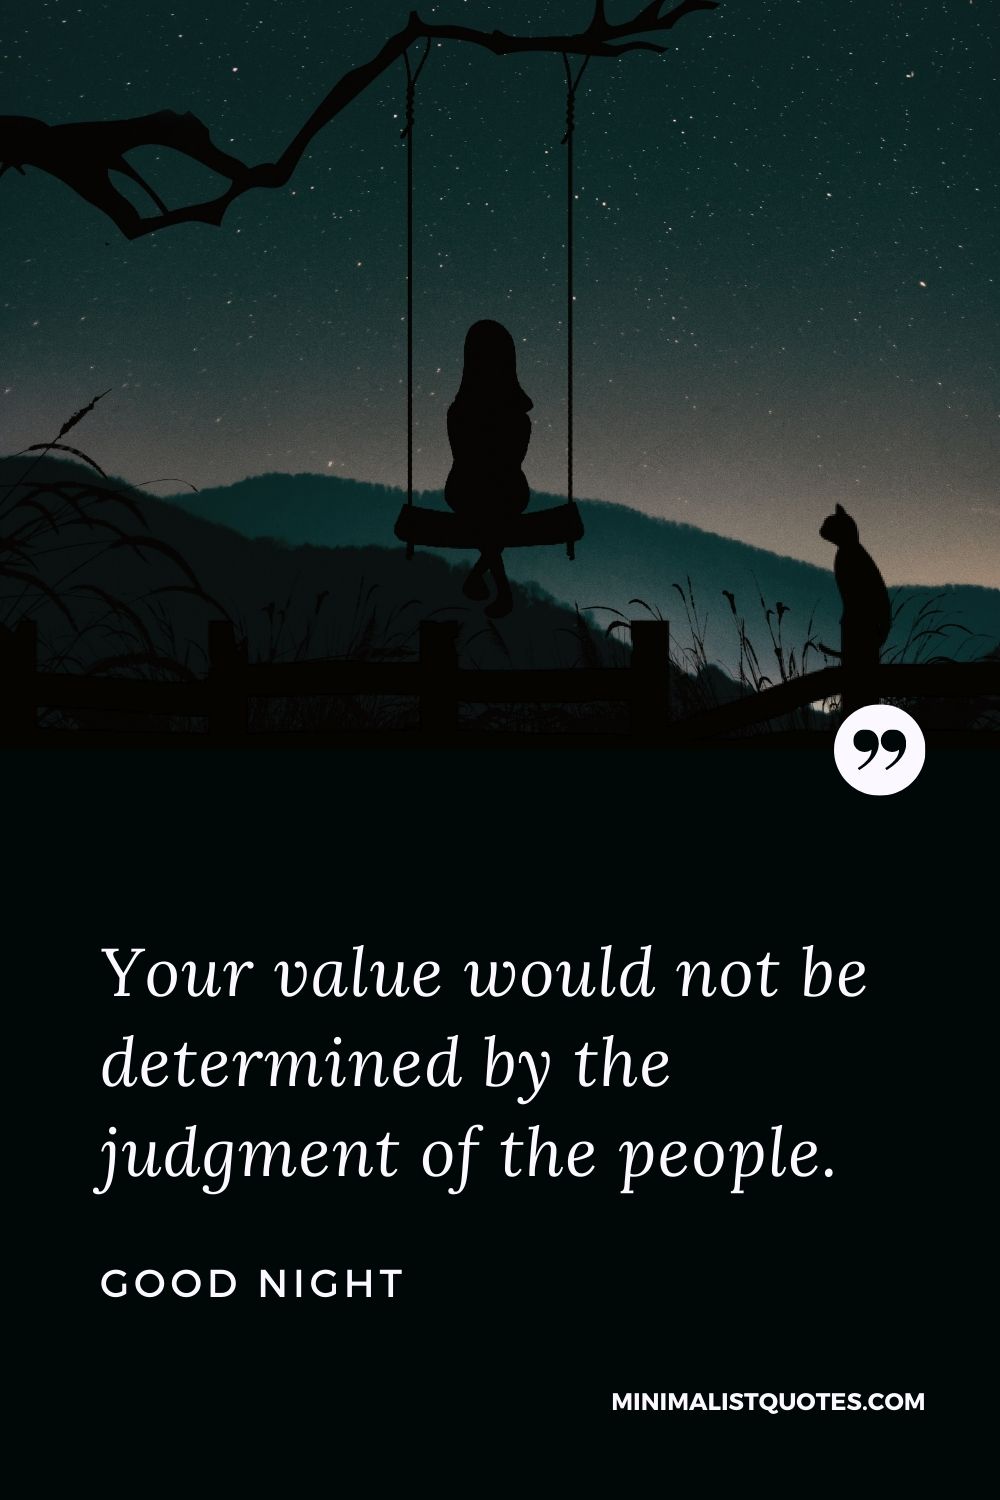 Good Night Wishes - Your value would not be determined by the judgment of the people.